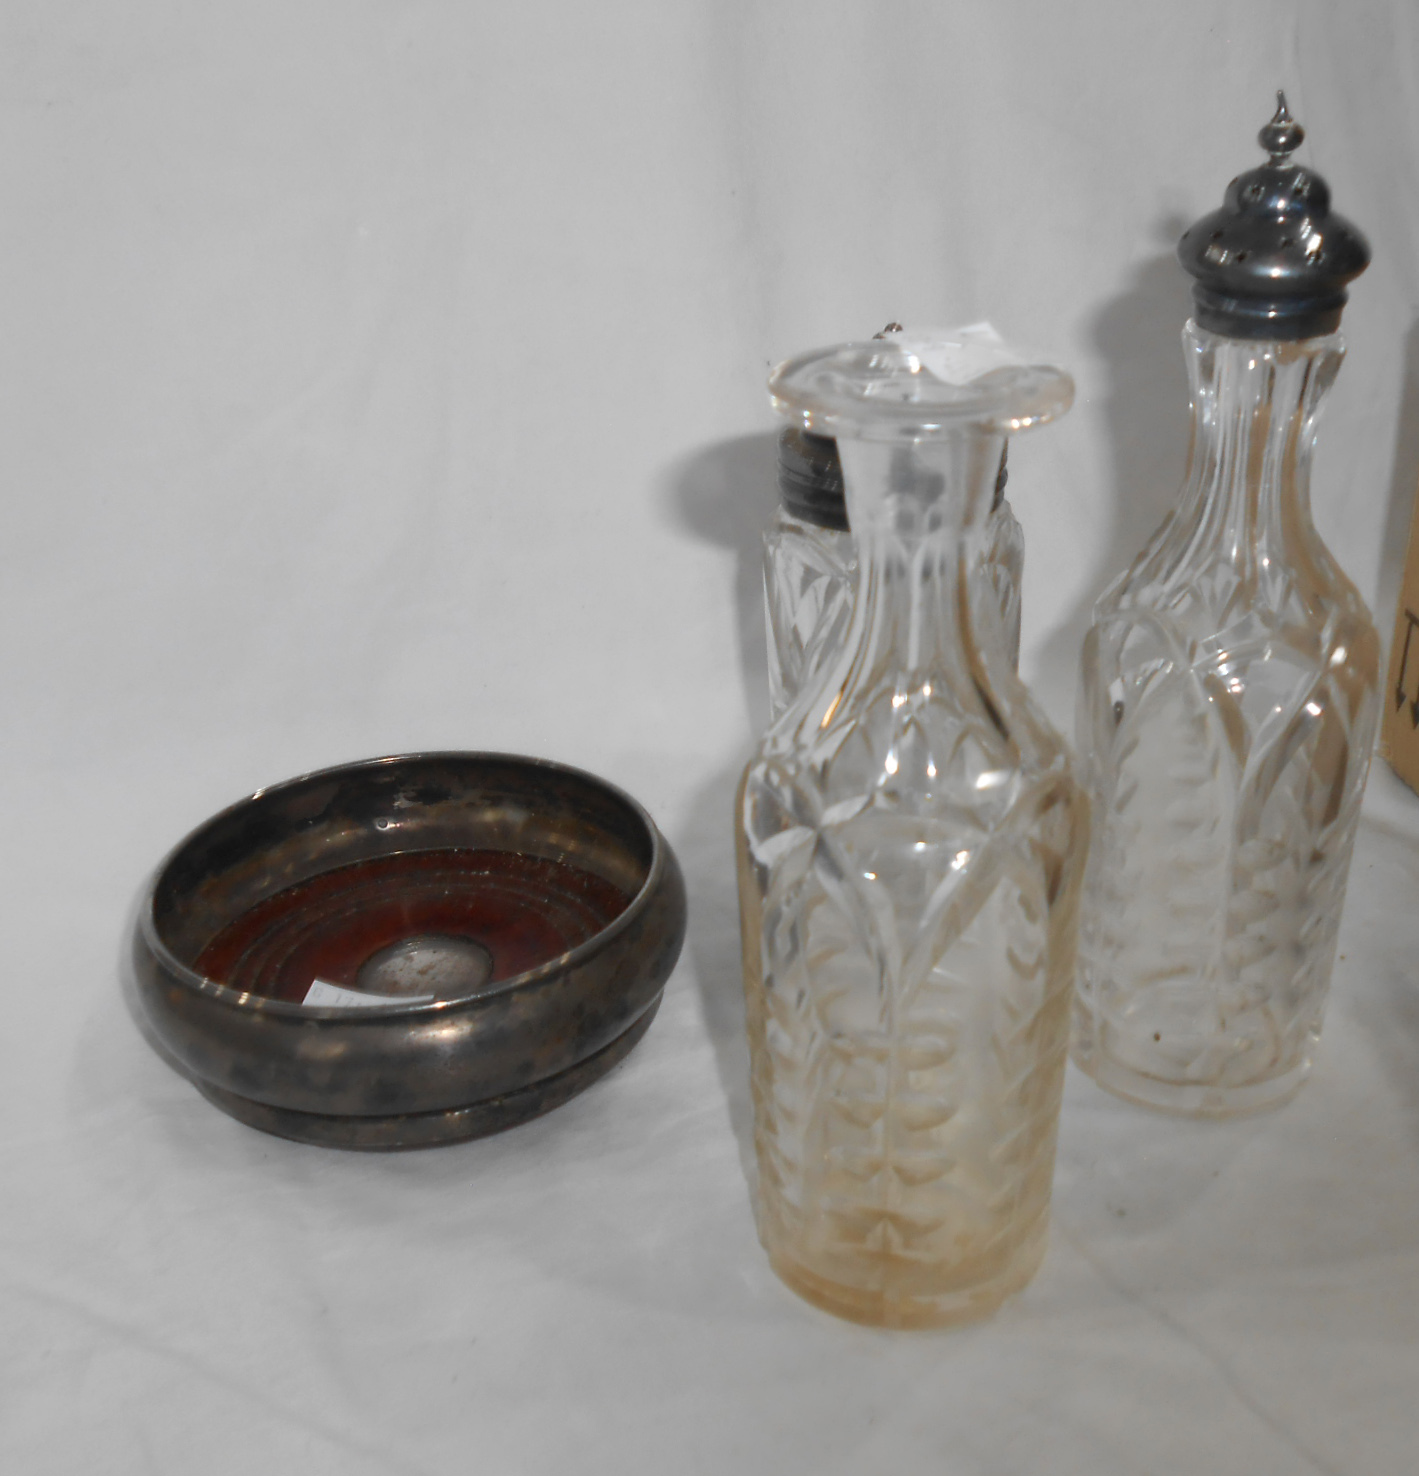 A silver wine coaster with turned wood base - sold with three cut glass cruet bottles